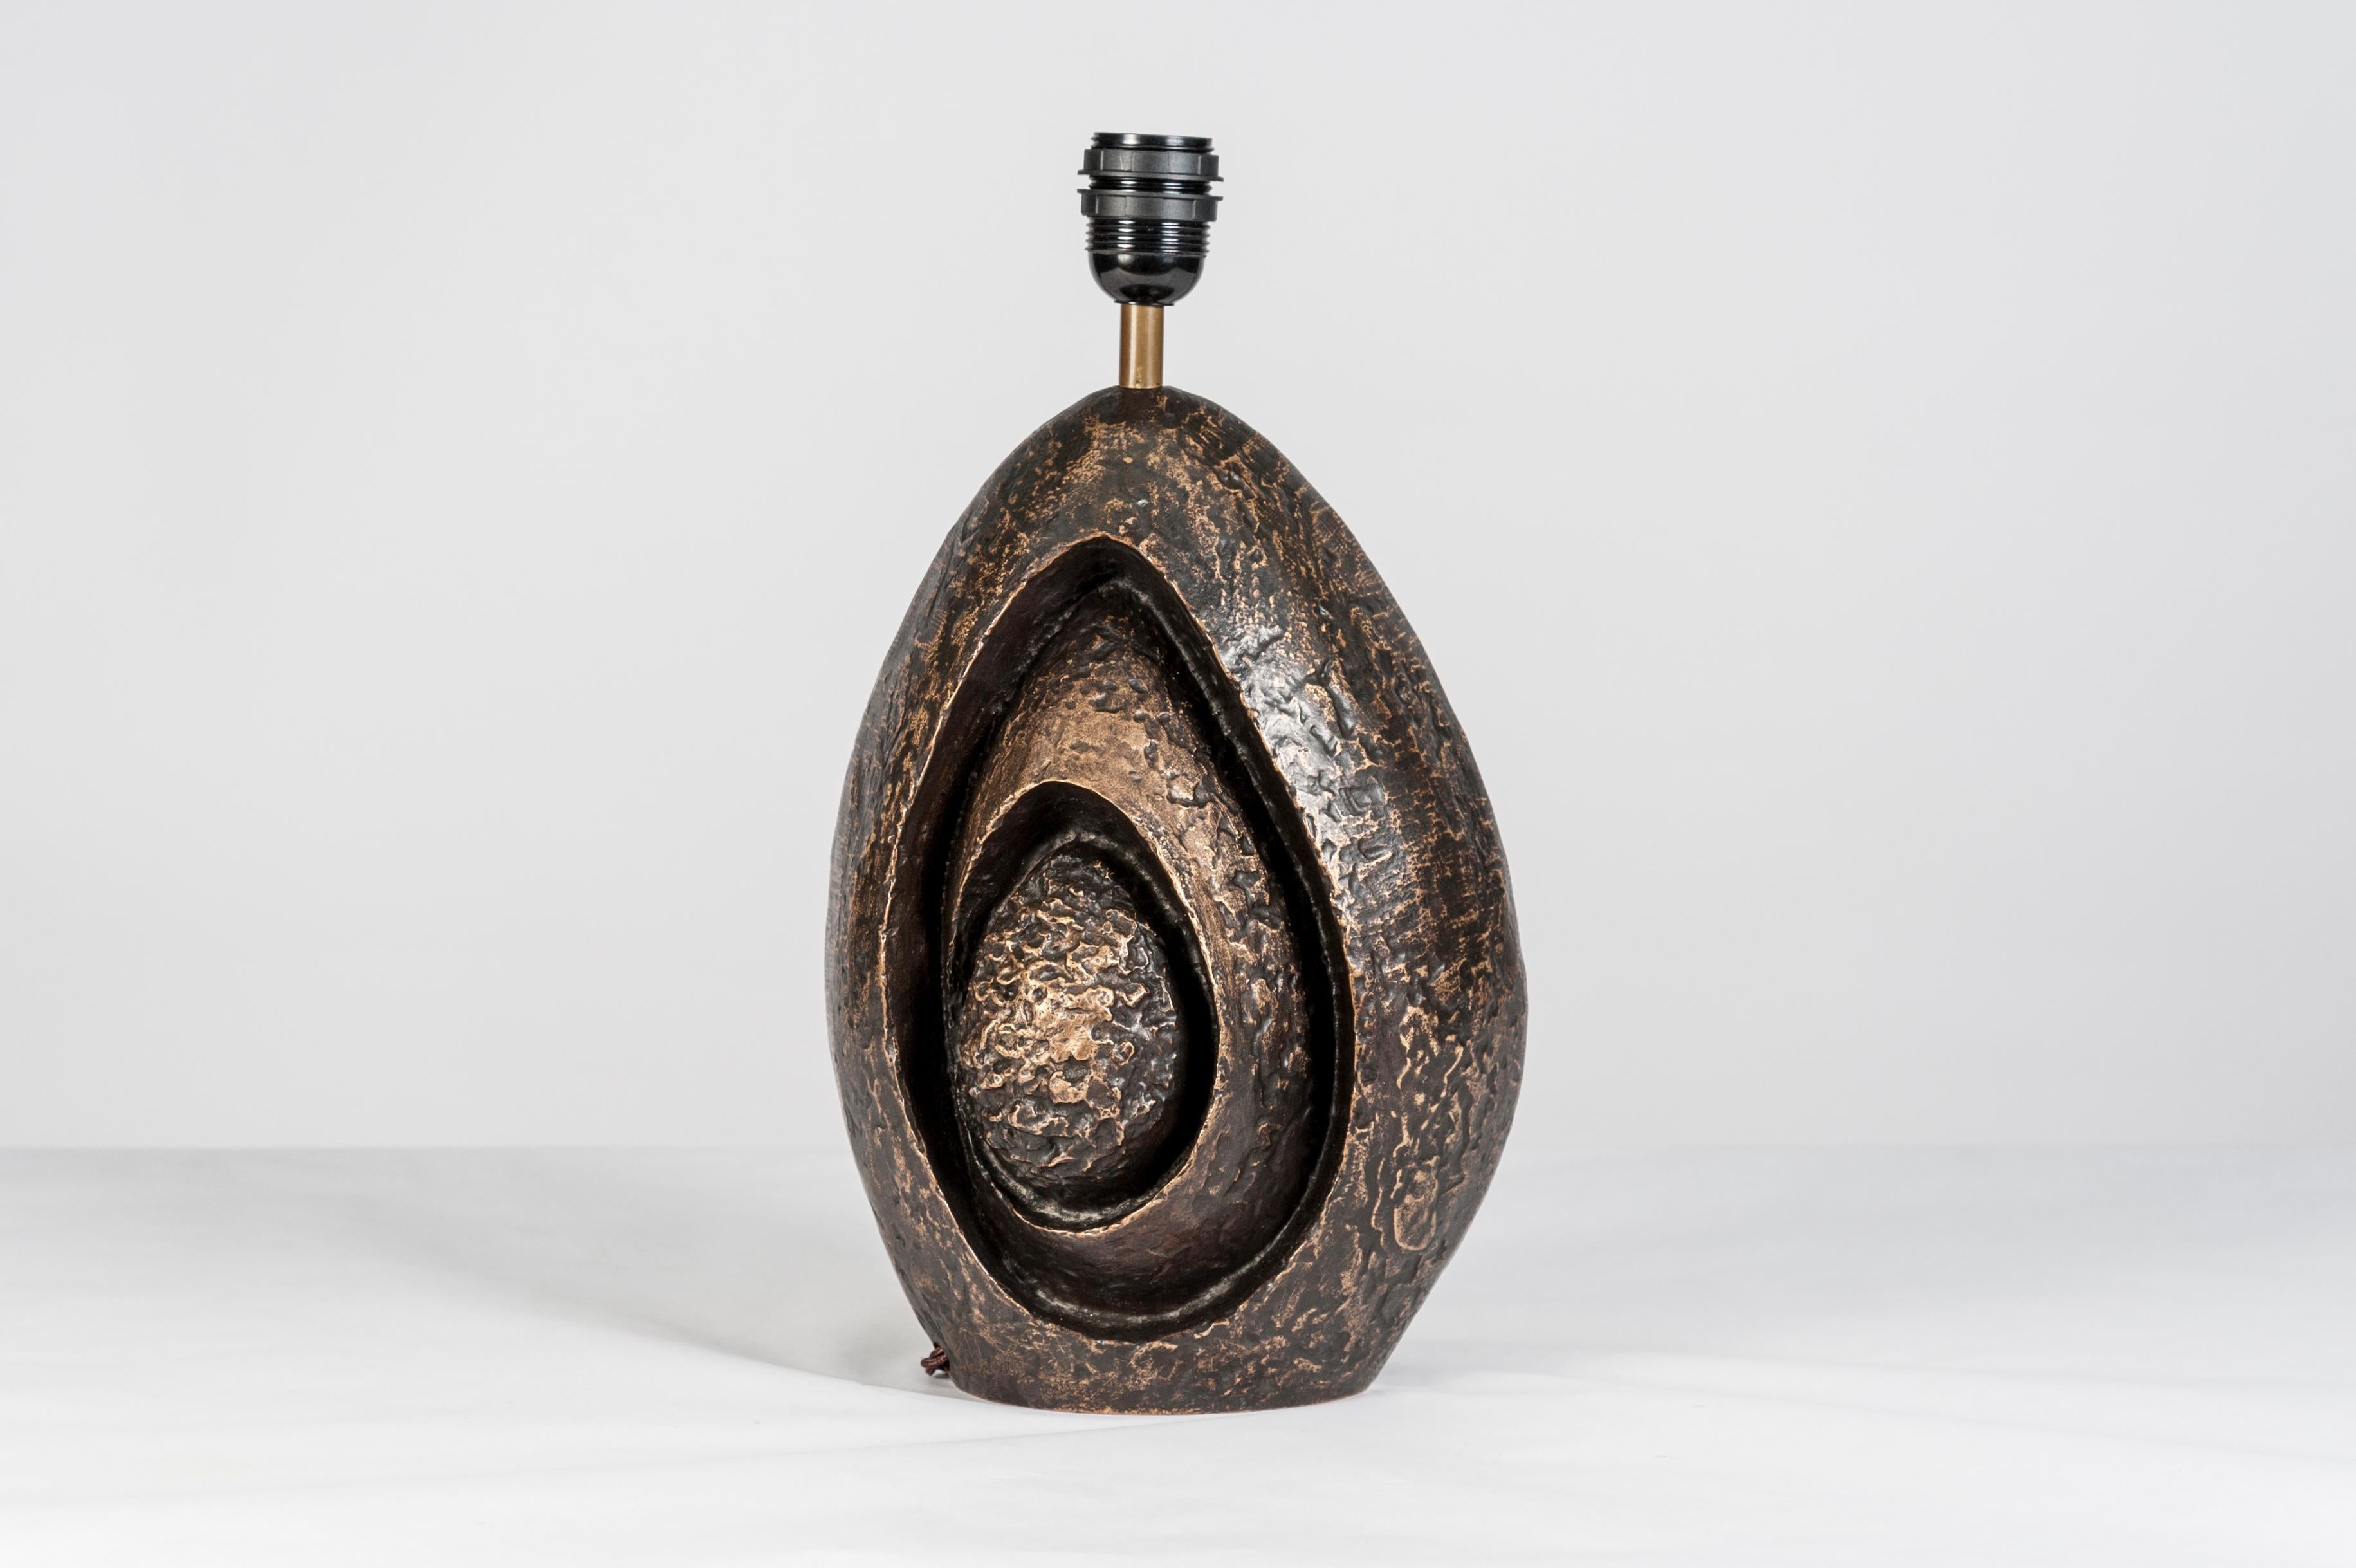 Rare Sculptural Bronze Lamp by Fernand Dresse In Good Condition For Sale In Bois-Colombes, FR